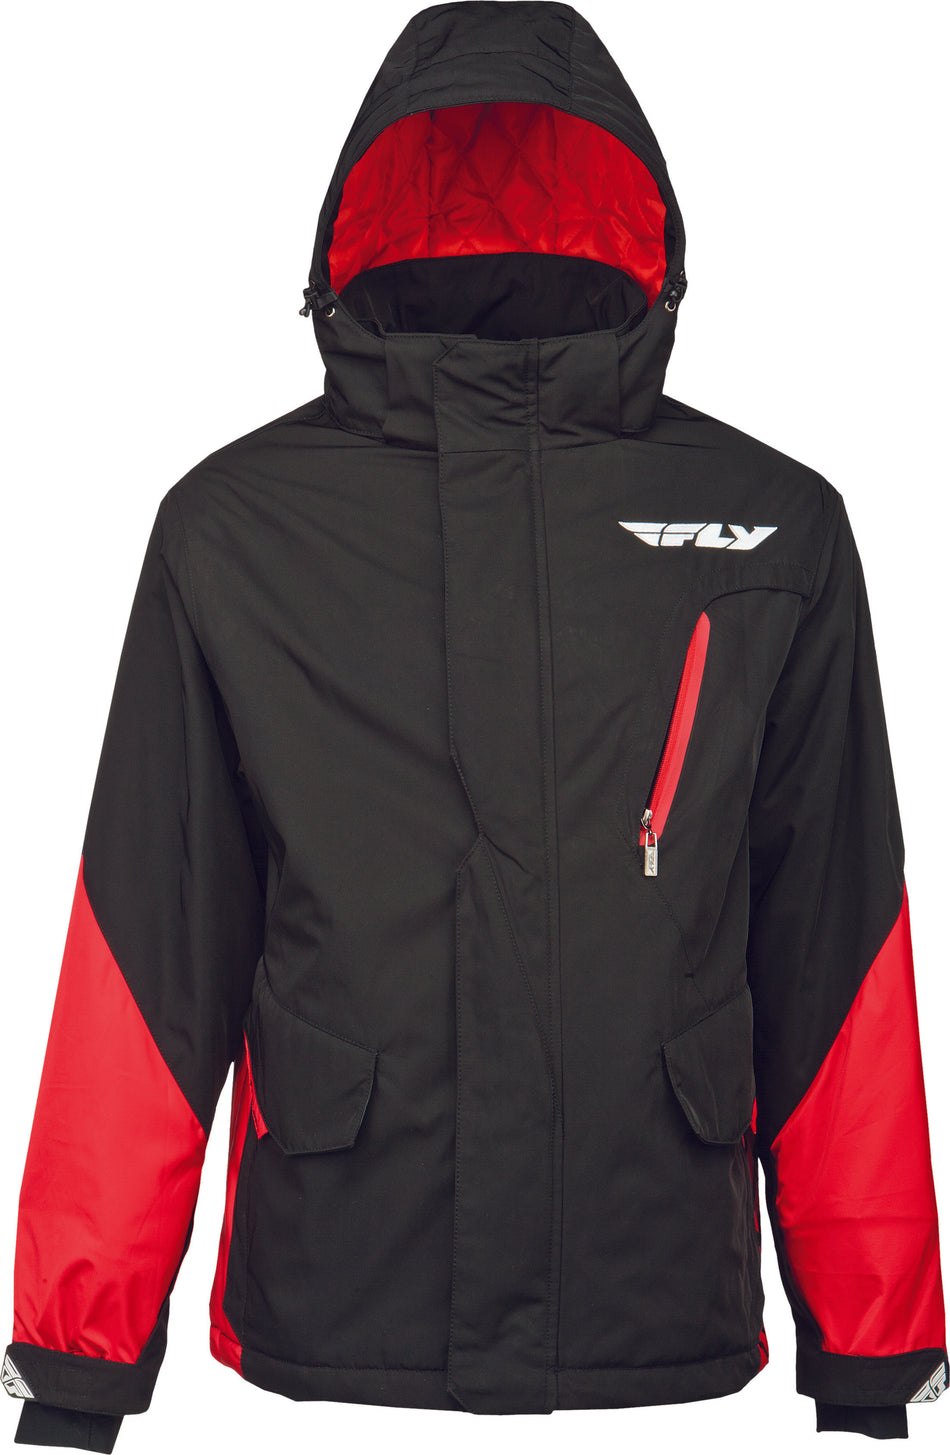 FLY RACING Factory Jacket Red/Black M 354-6162M